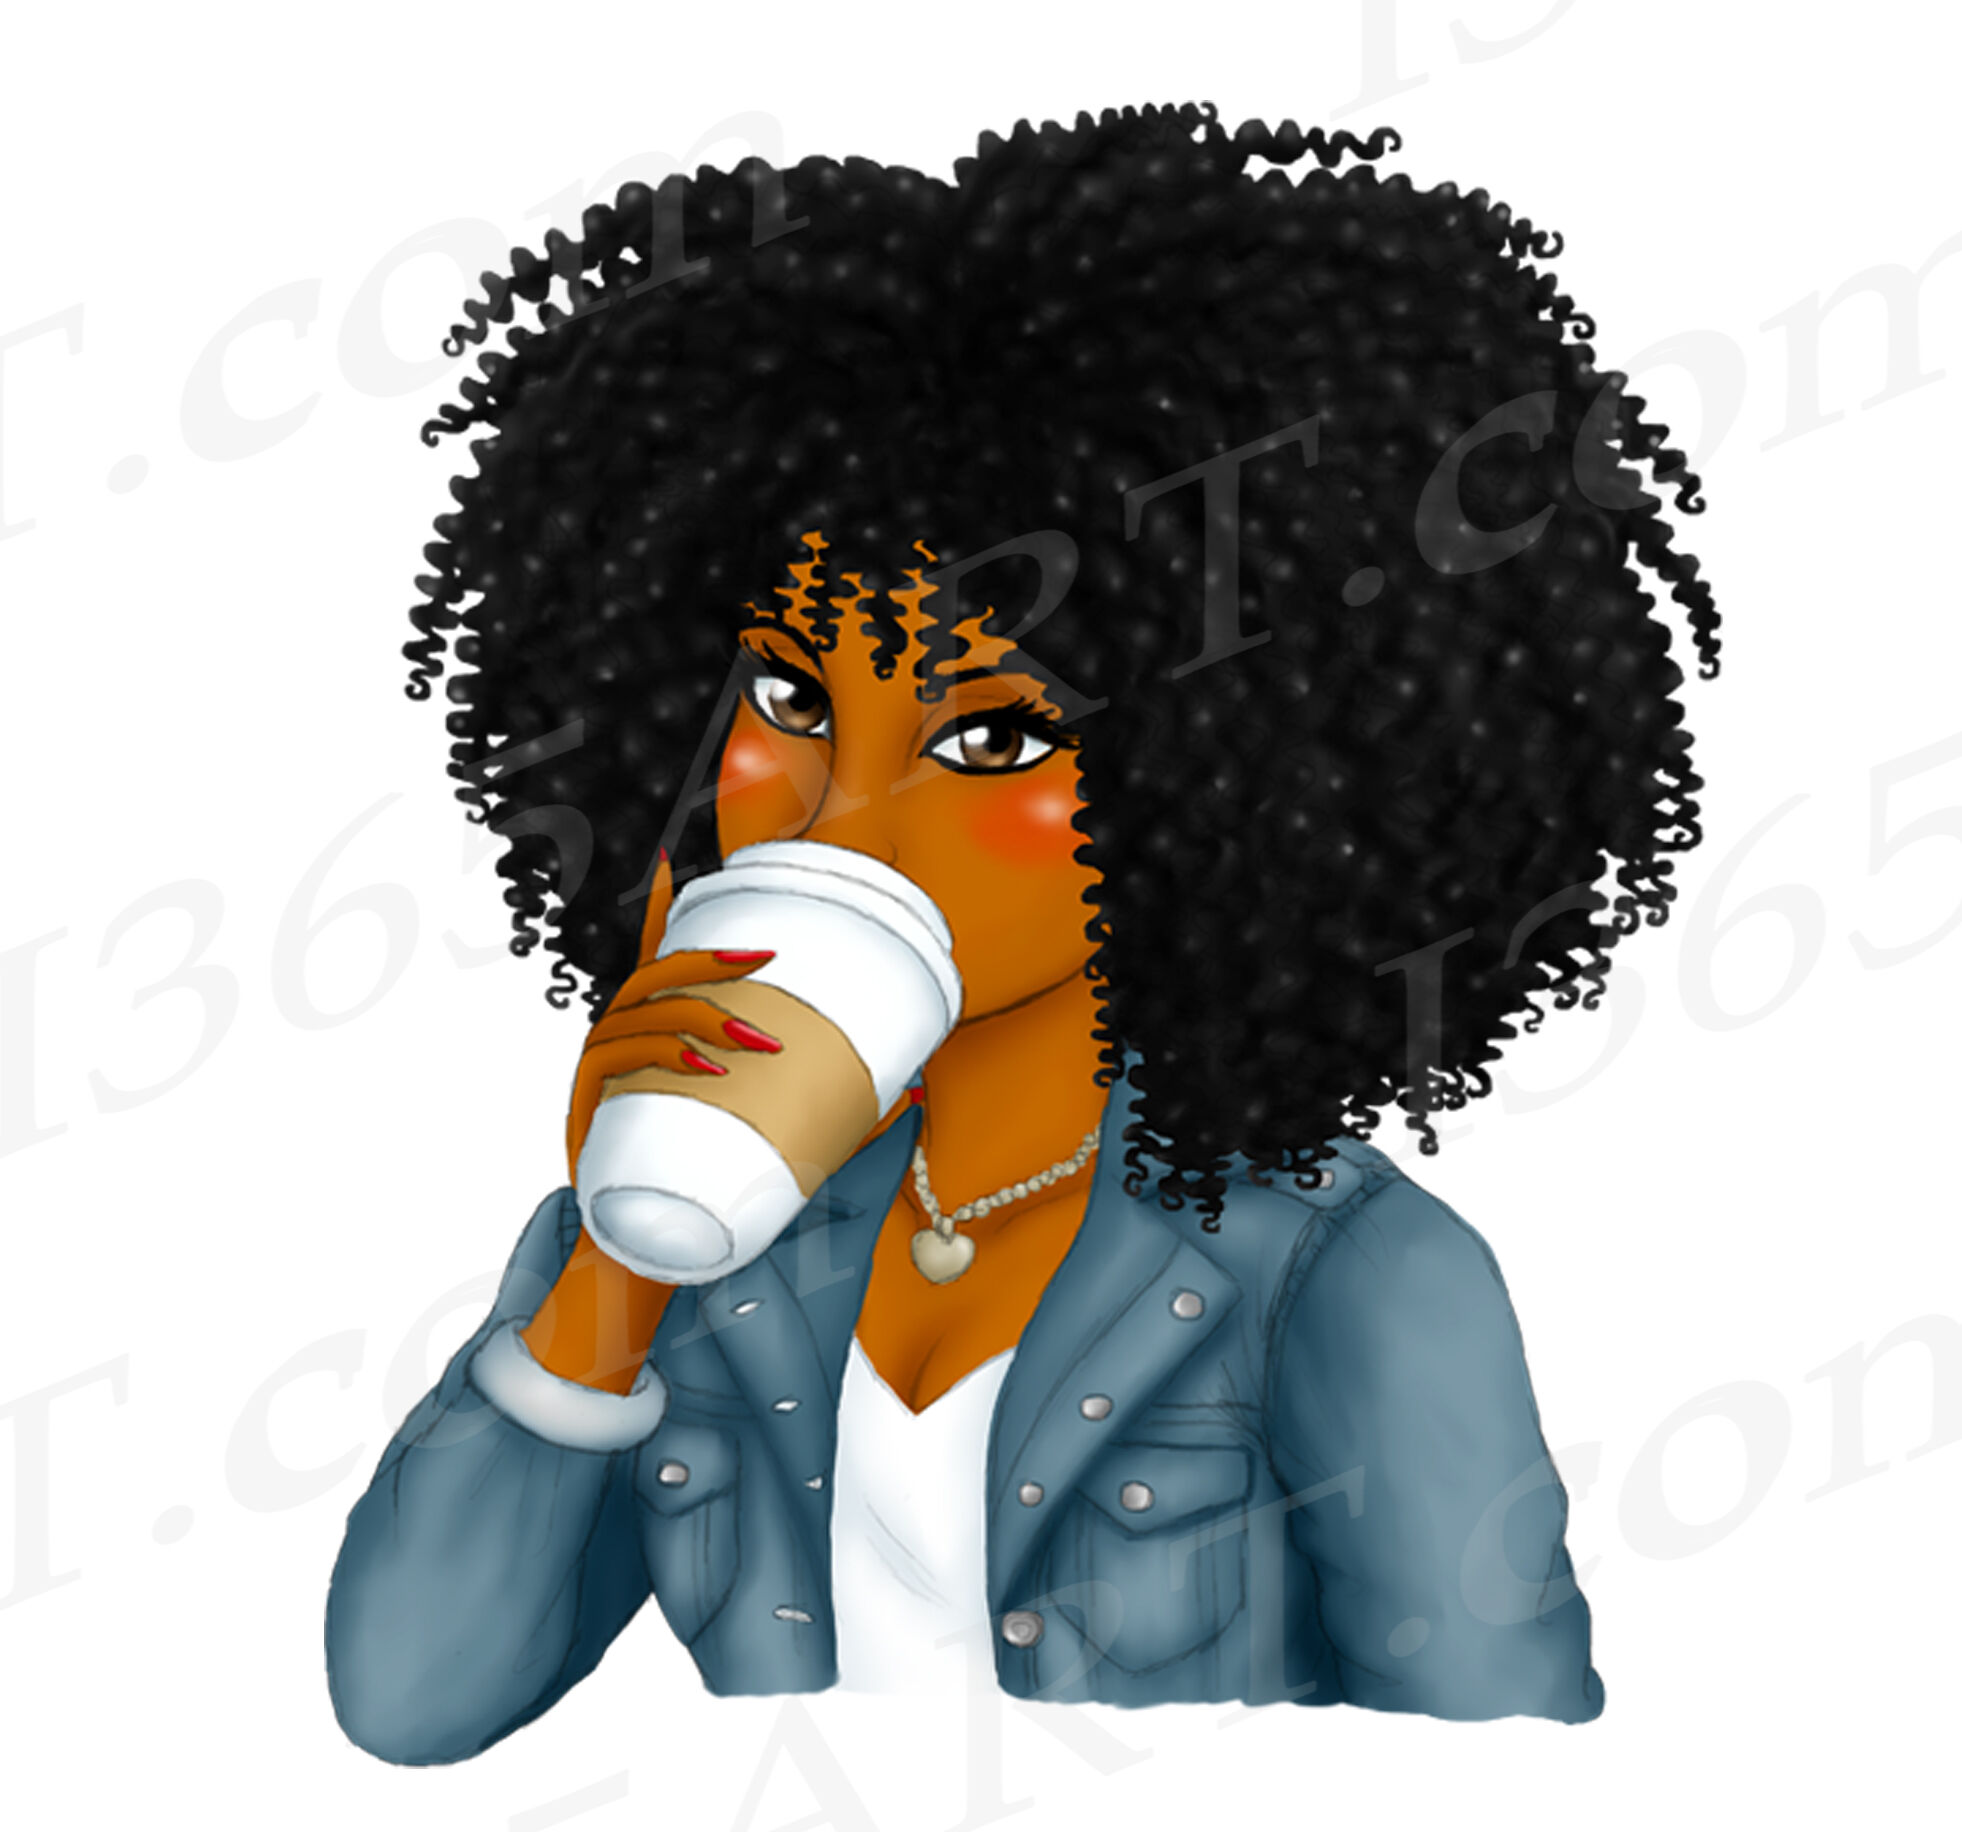 woman drinking coffee clipart